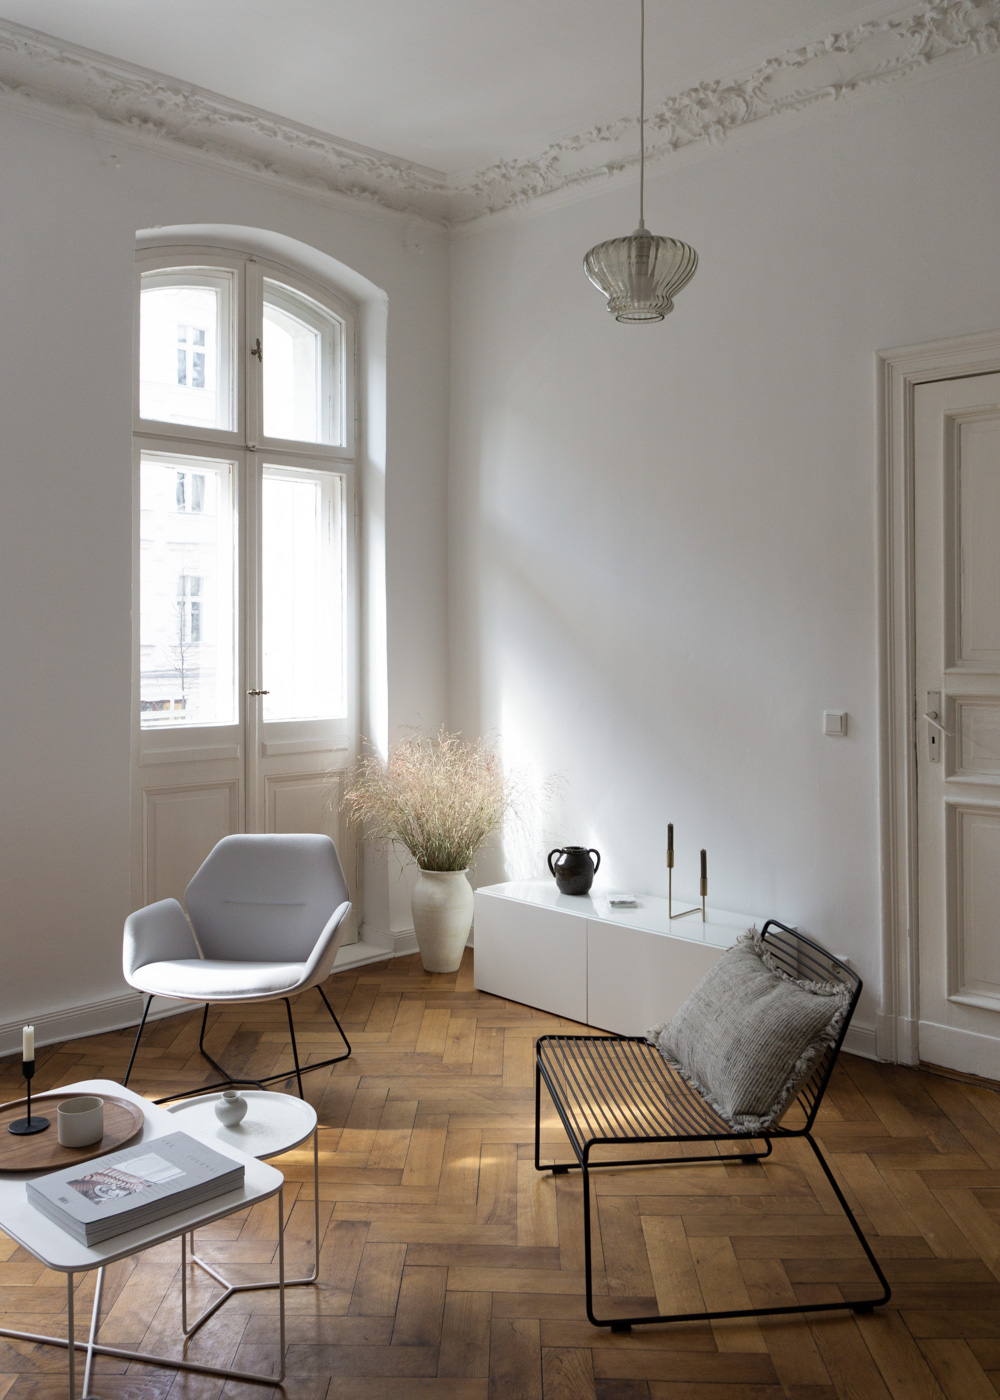 Hay Lounge | neutral interior, white and beige home, wood floors, minimalist simple decor, natural berlin apartment, scandinavian design, calm aesthetic